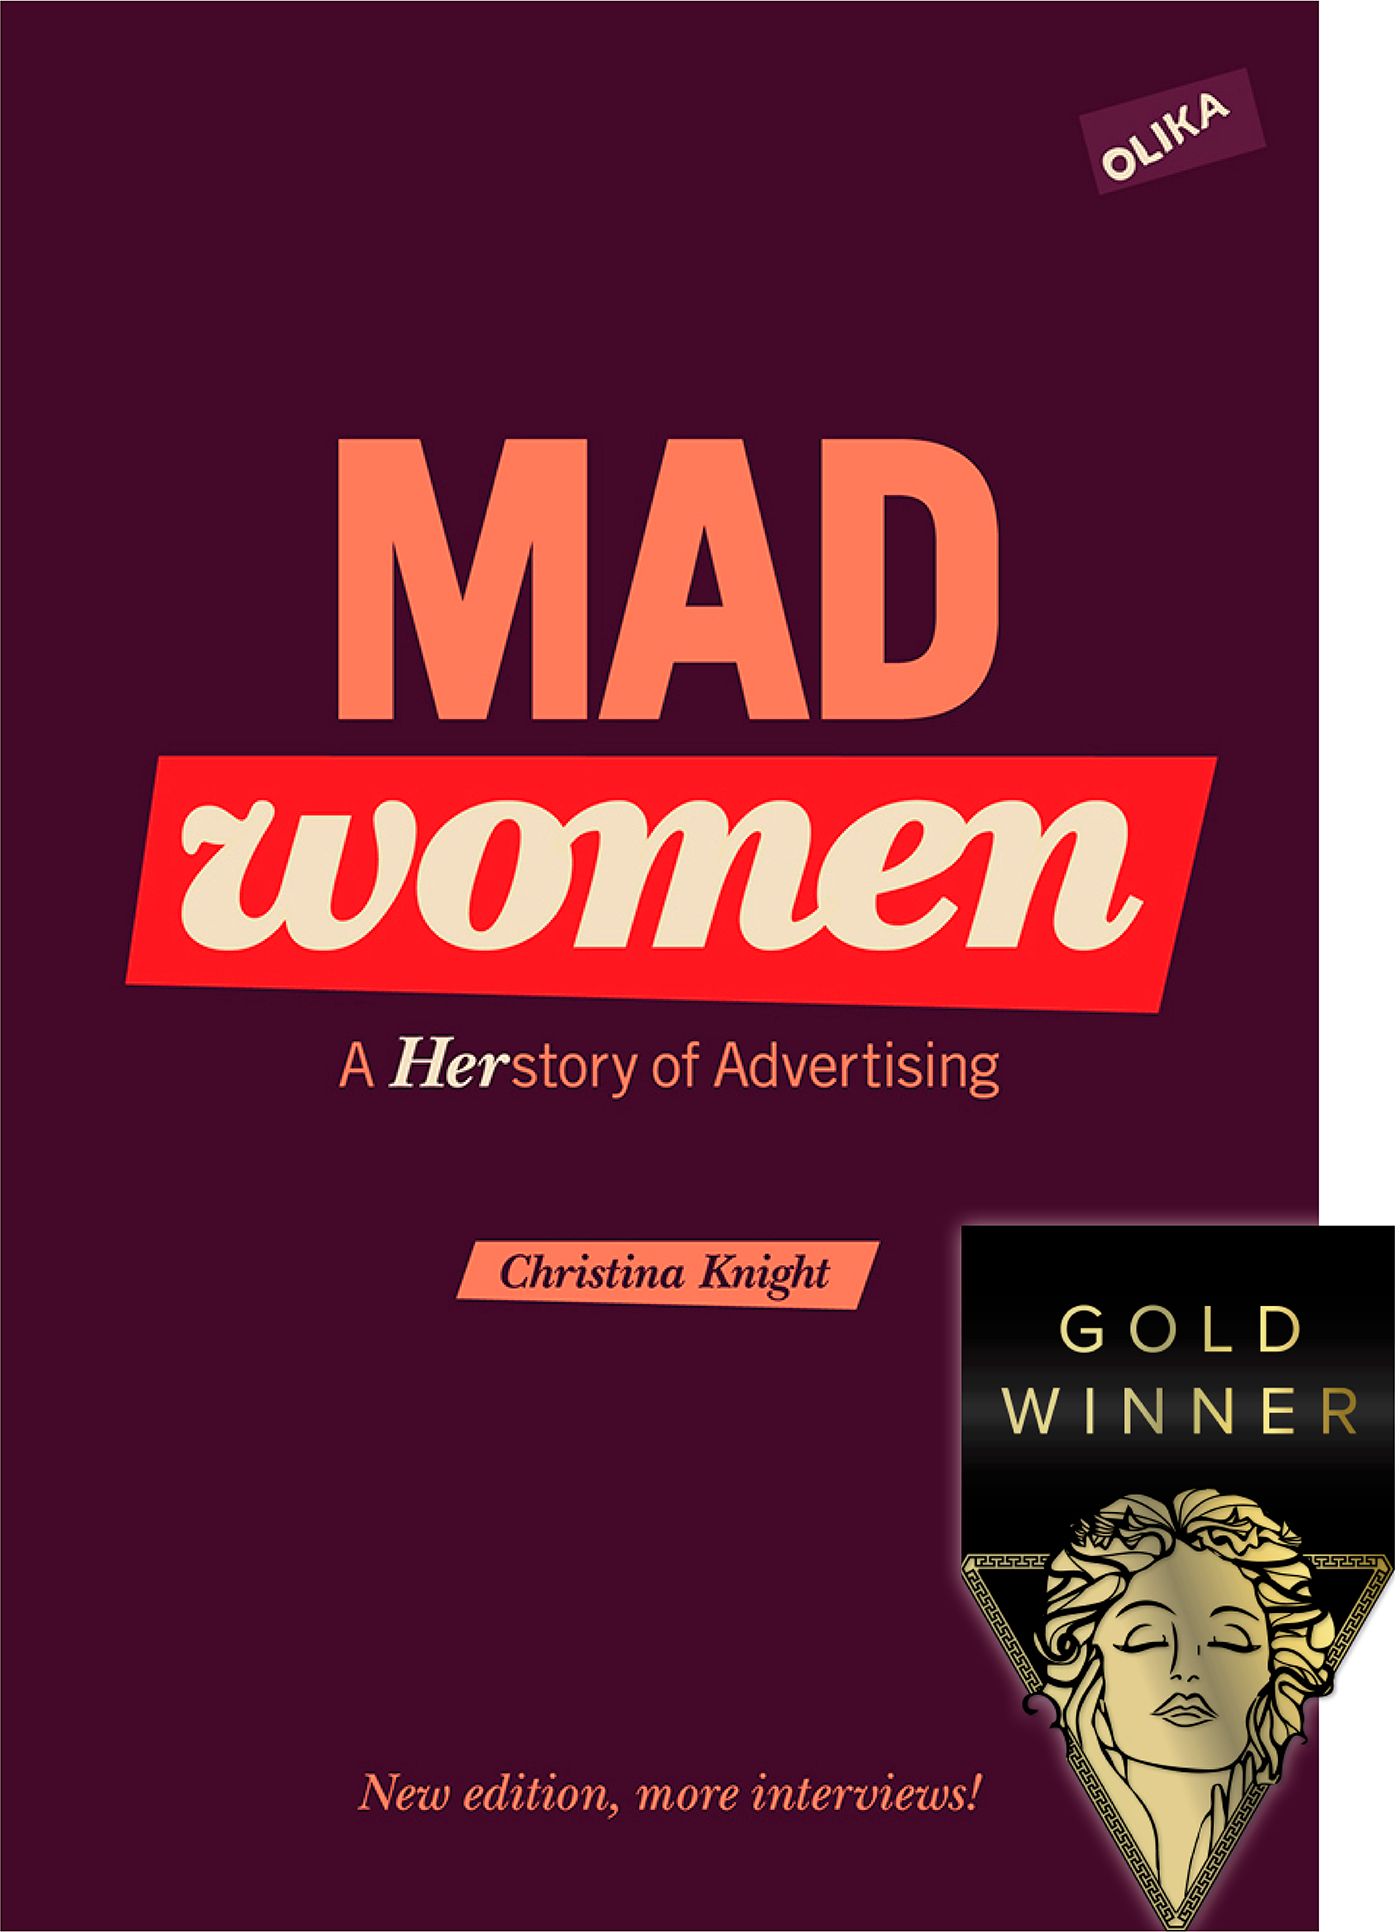 Mad Women : A Herstory of AdvertisingMad Women : A Herstory of Advertising (New Edition), eBook by Christina Knight